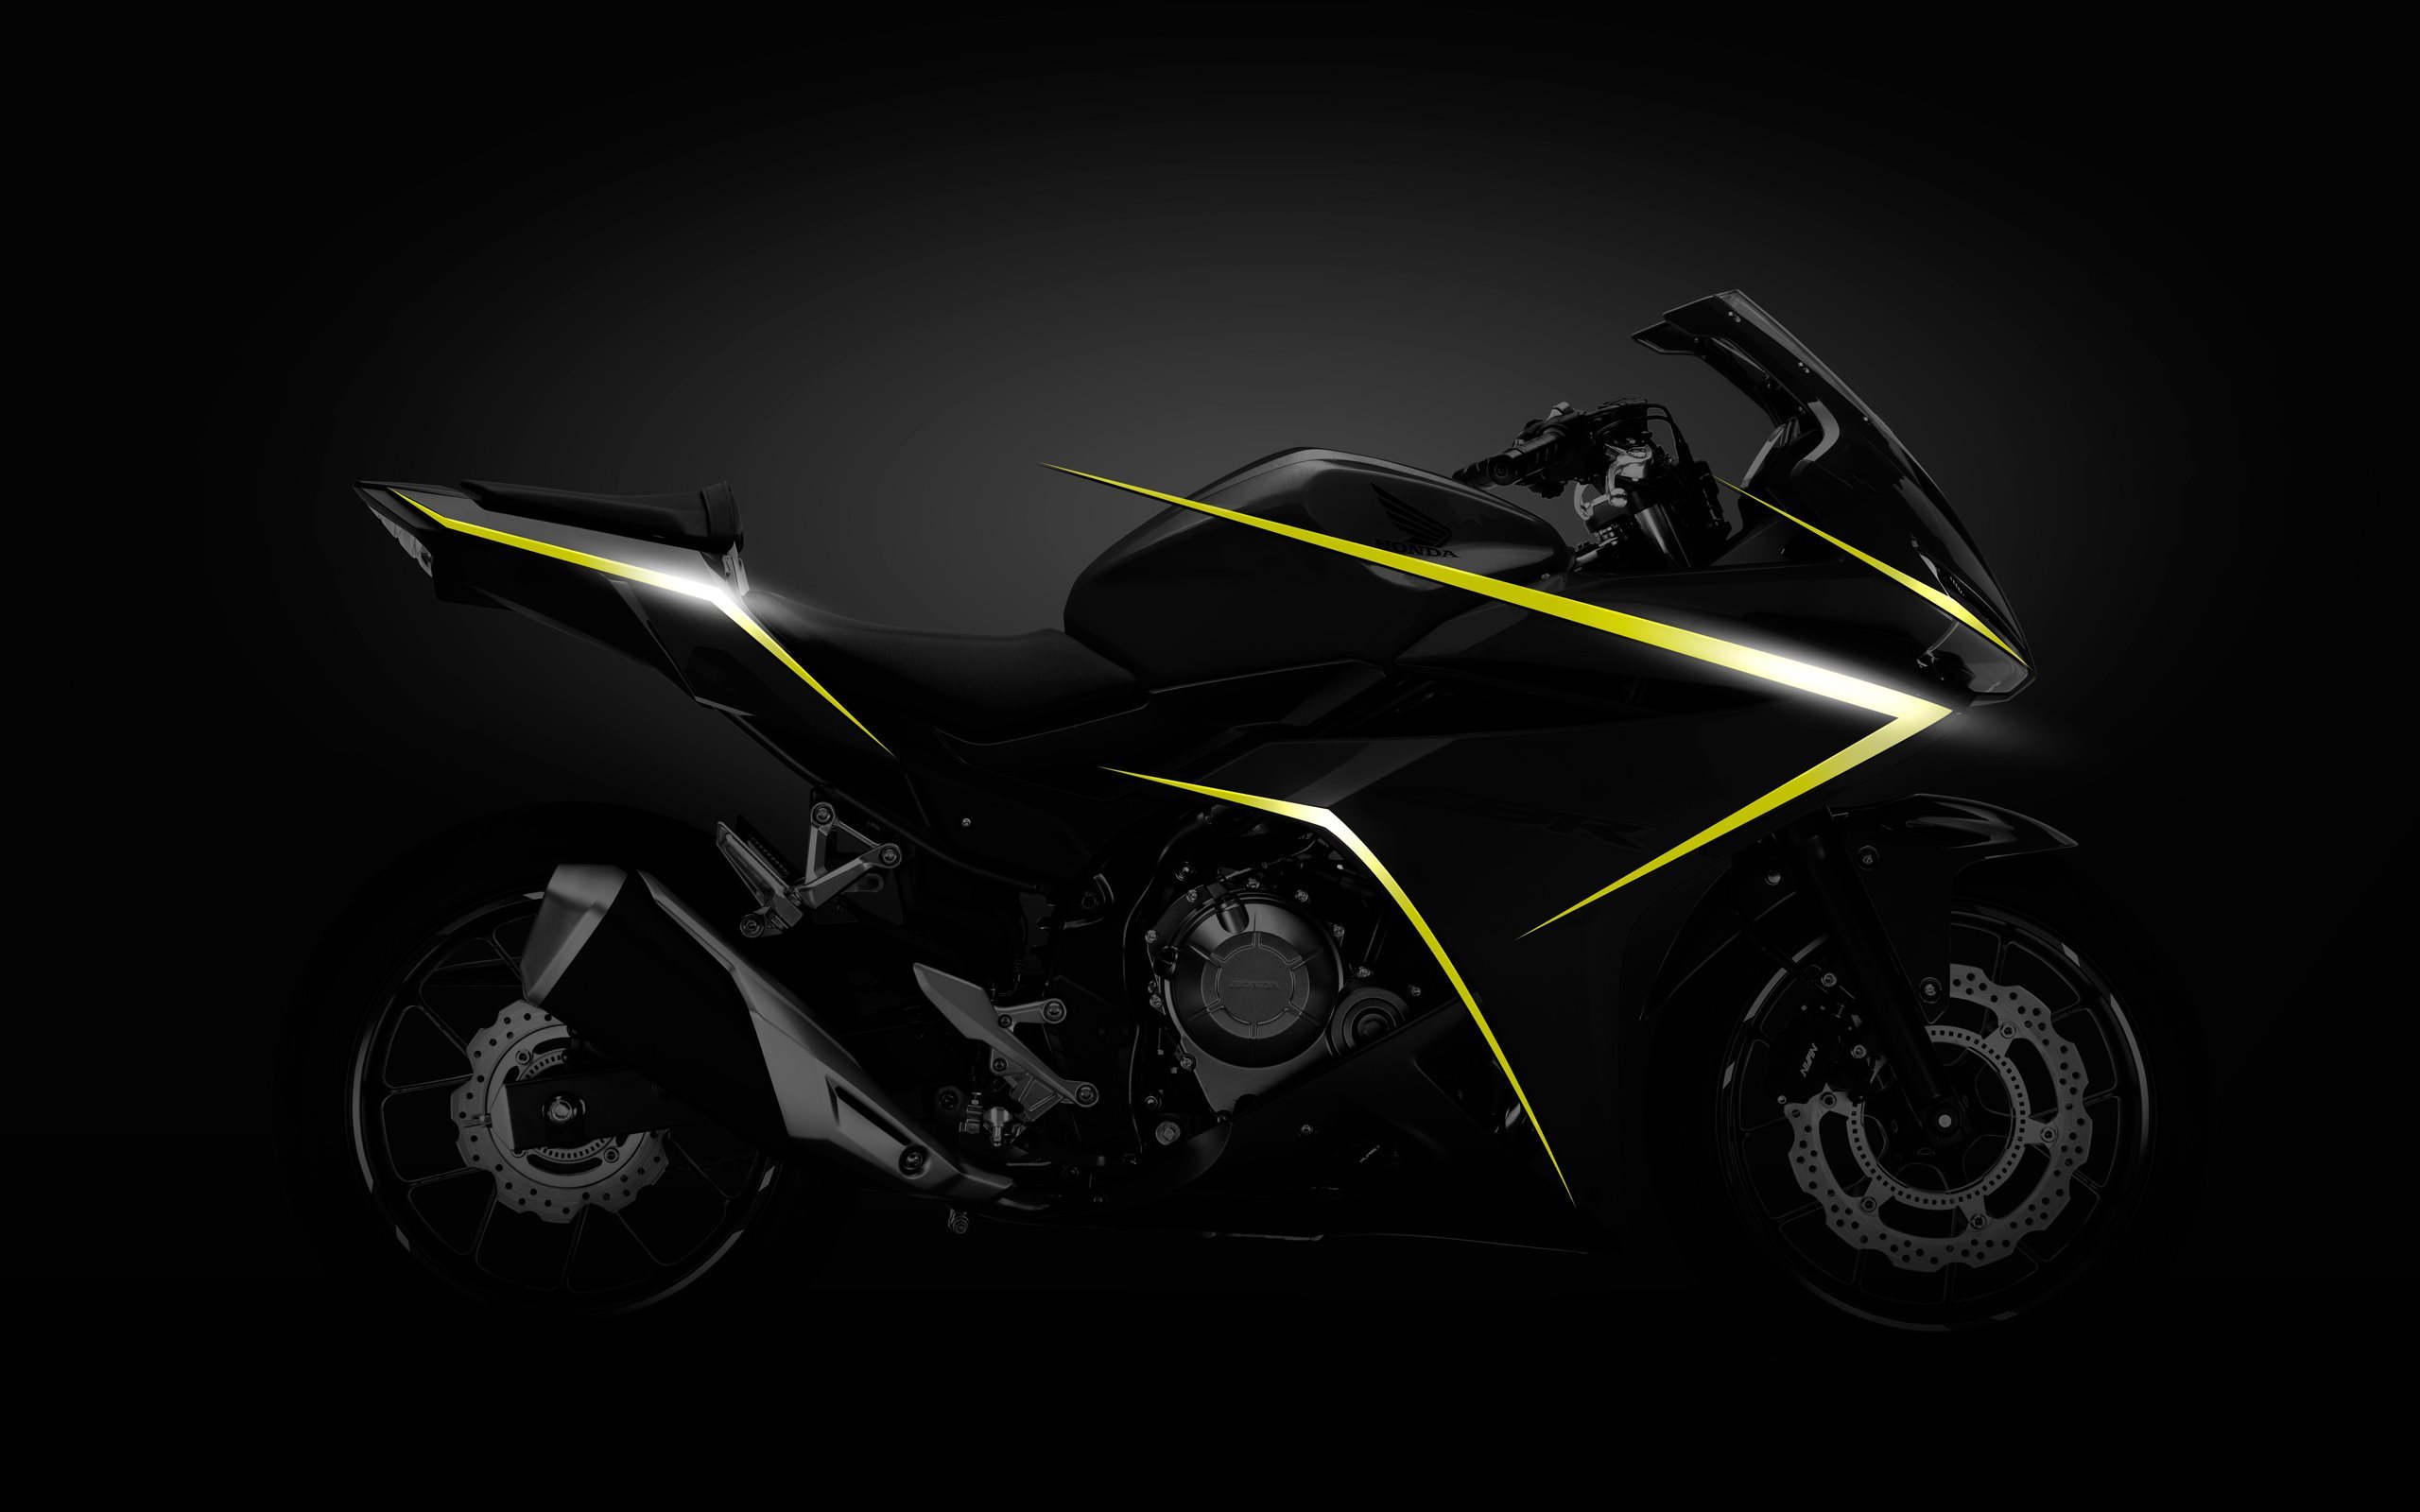 Honda Cbr500r Black Sport Motorcycle 3857 Wallpapers and Free